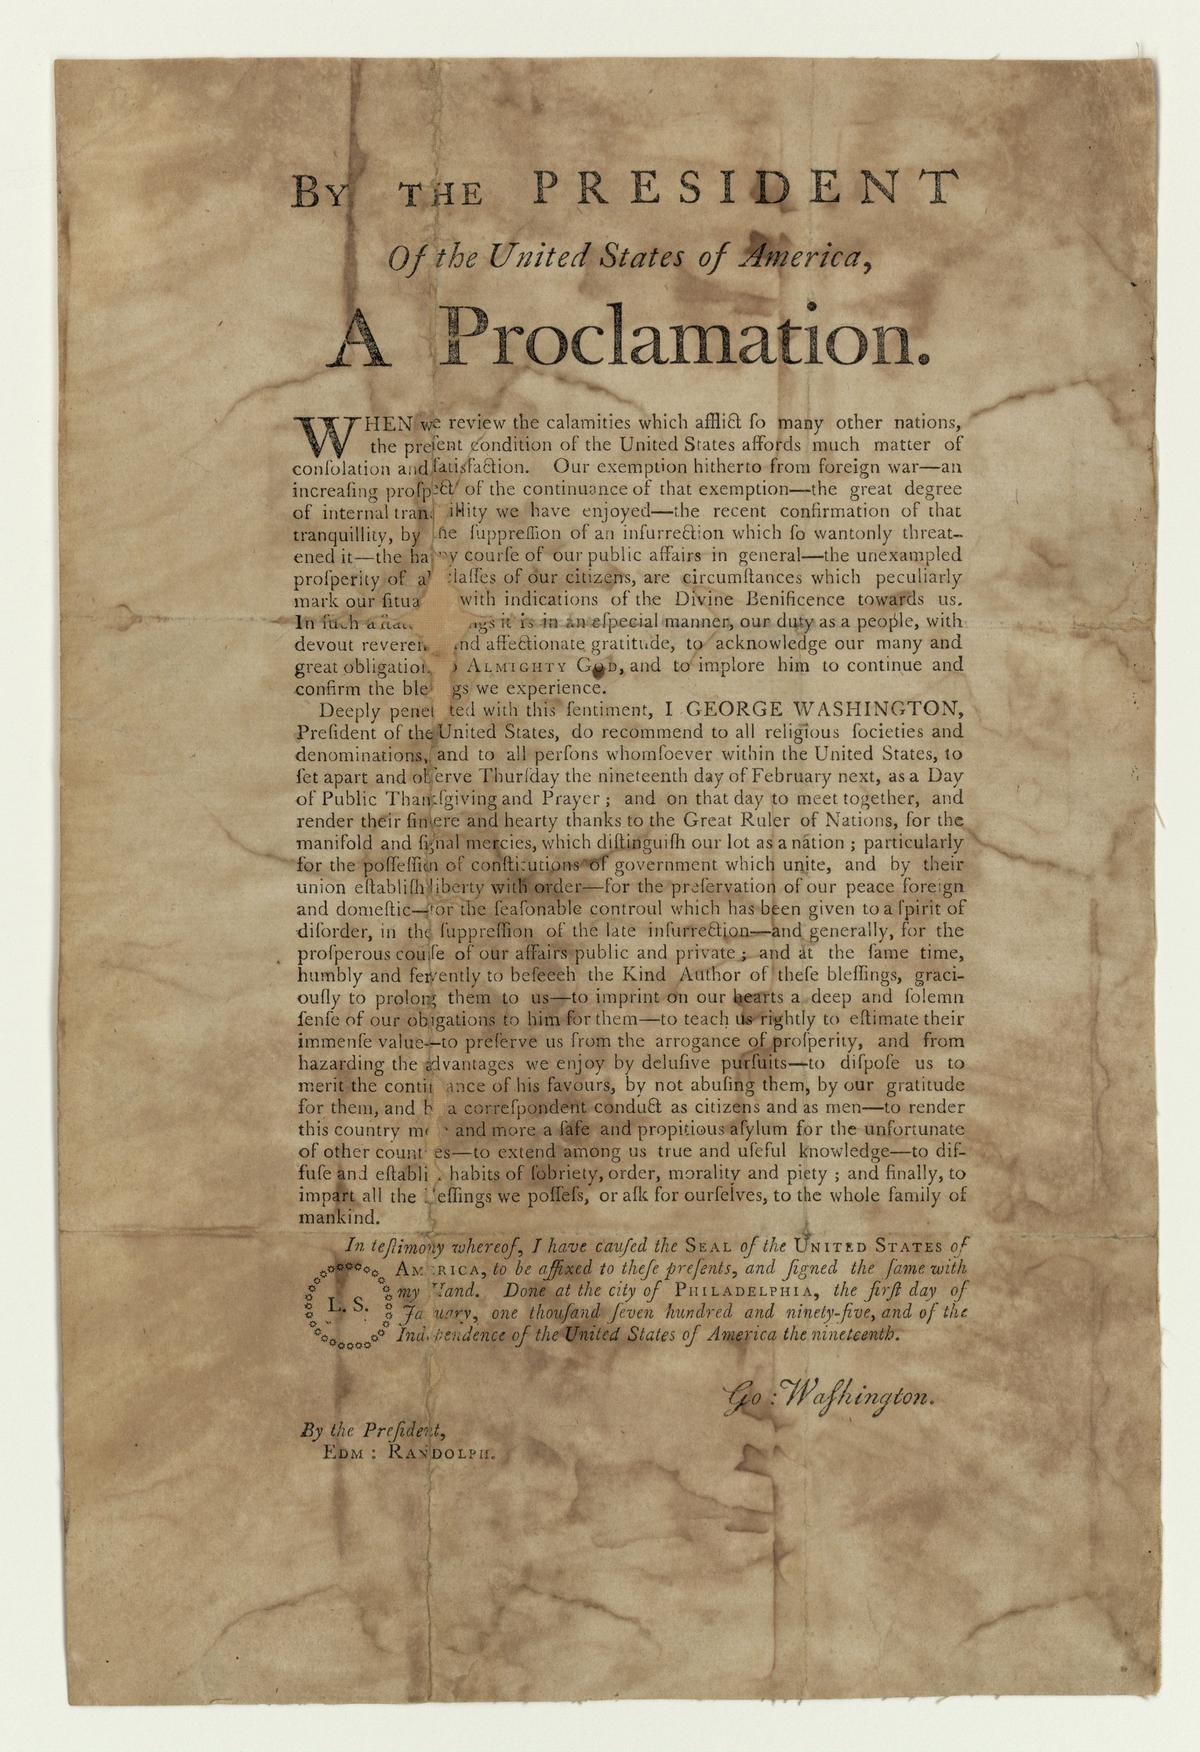 George Washington's Thanksgiving Proclamation from 1795. (Public domain)